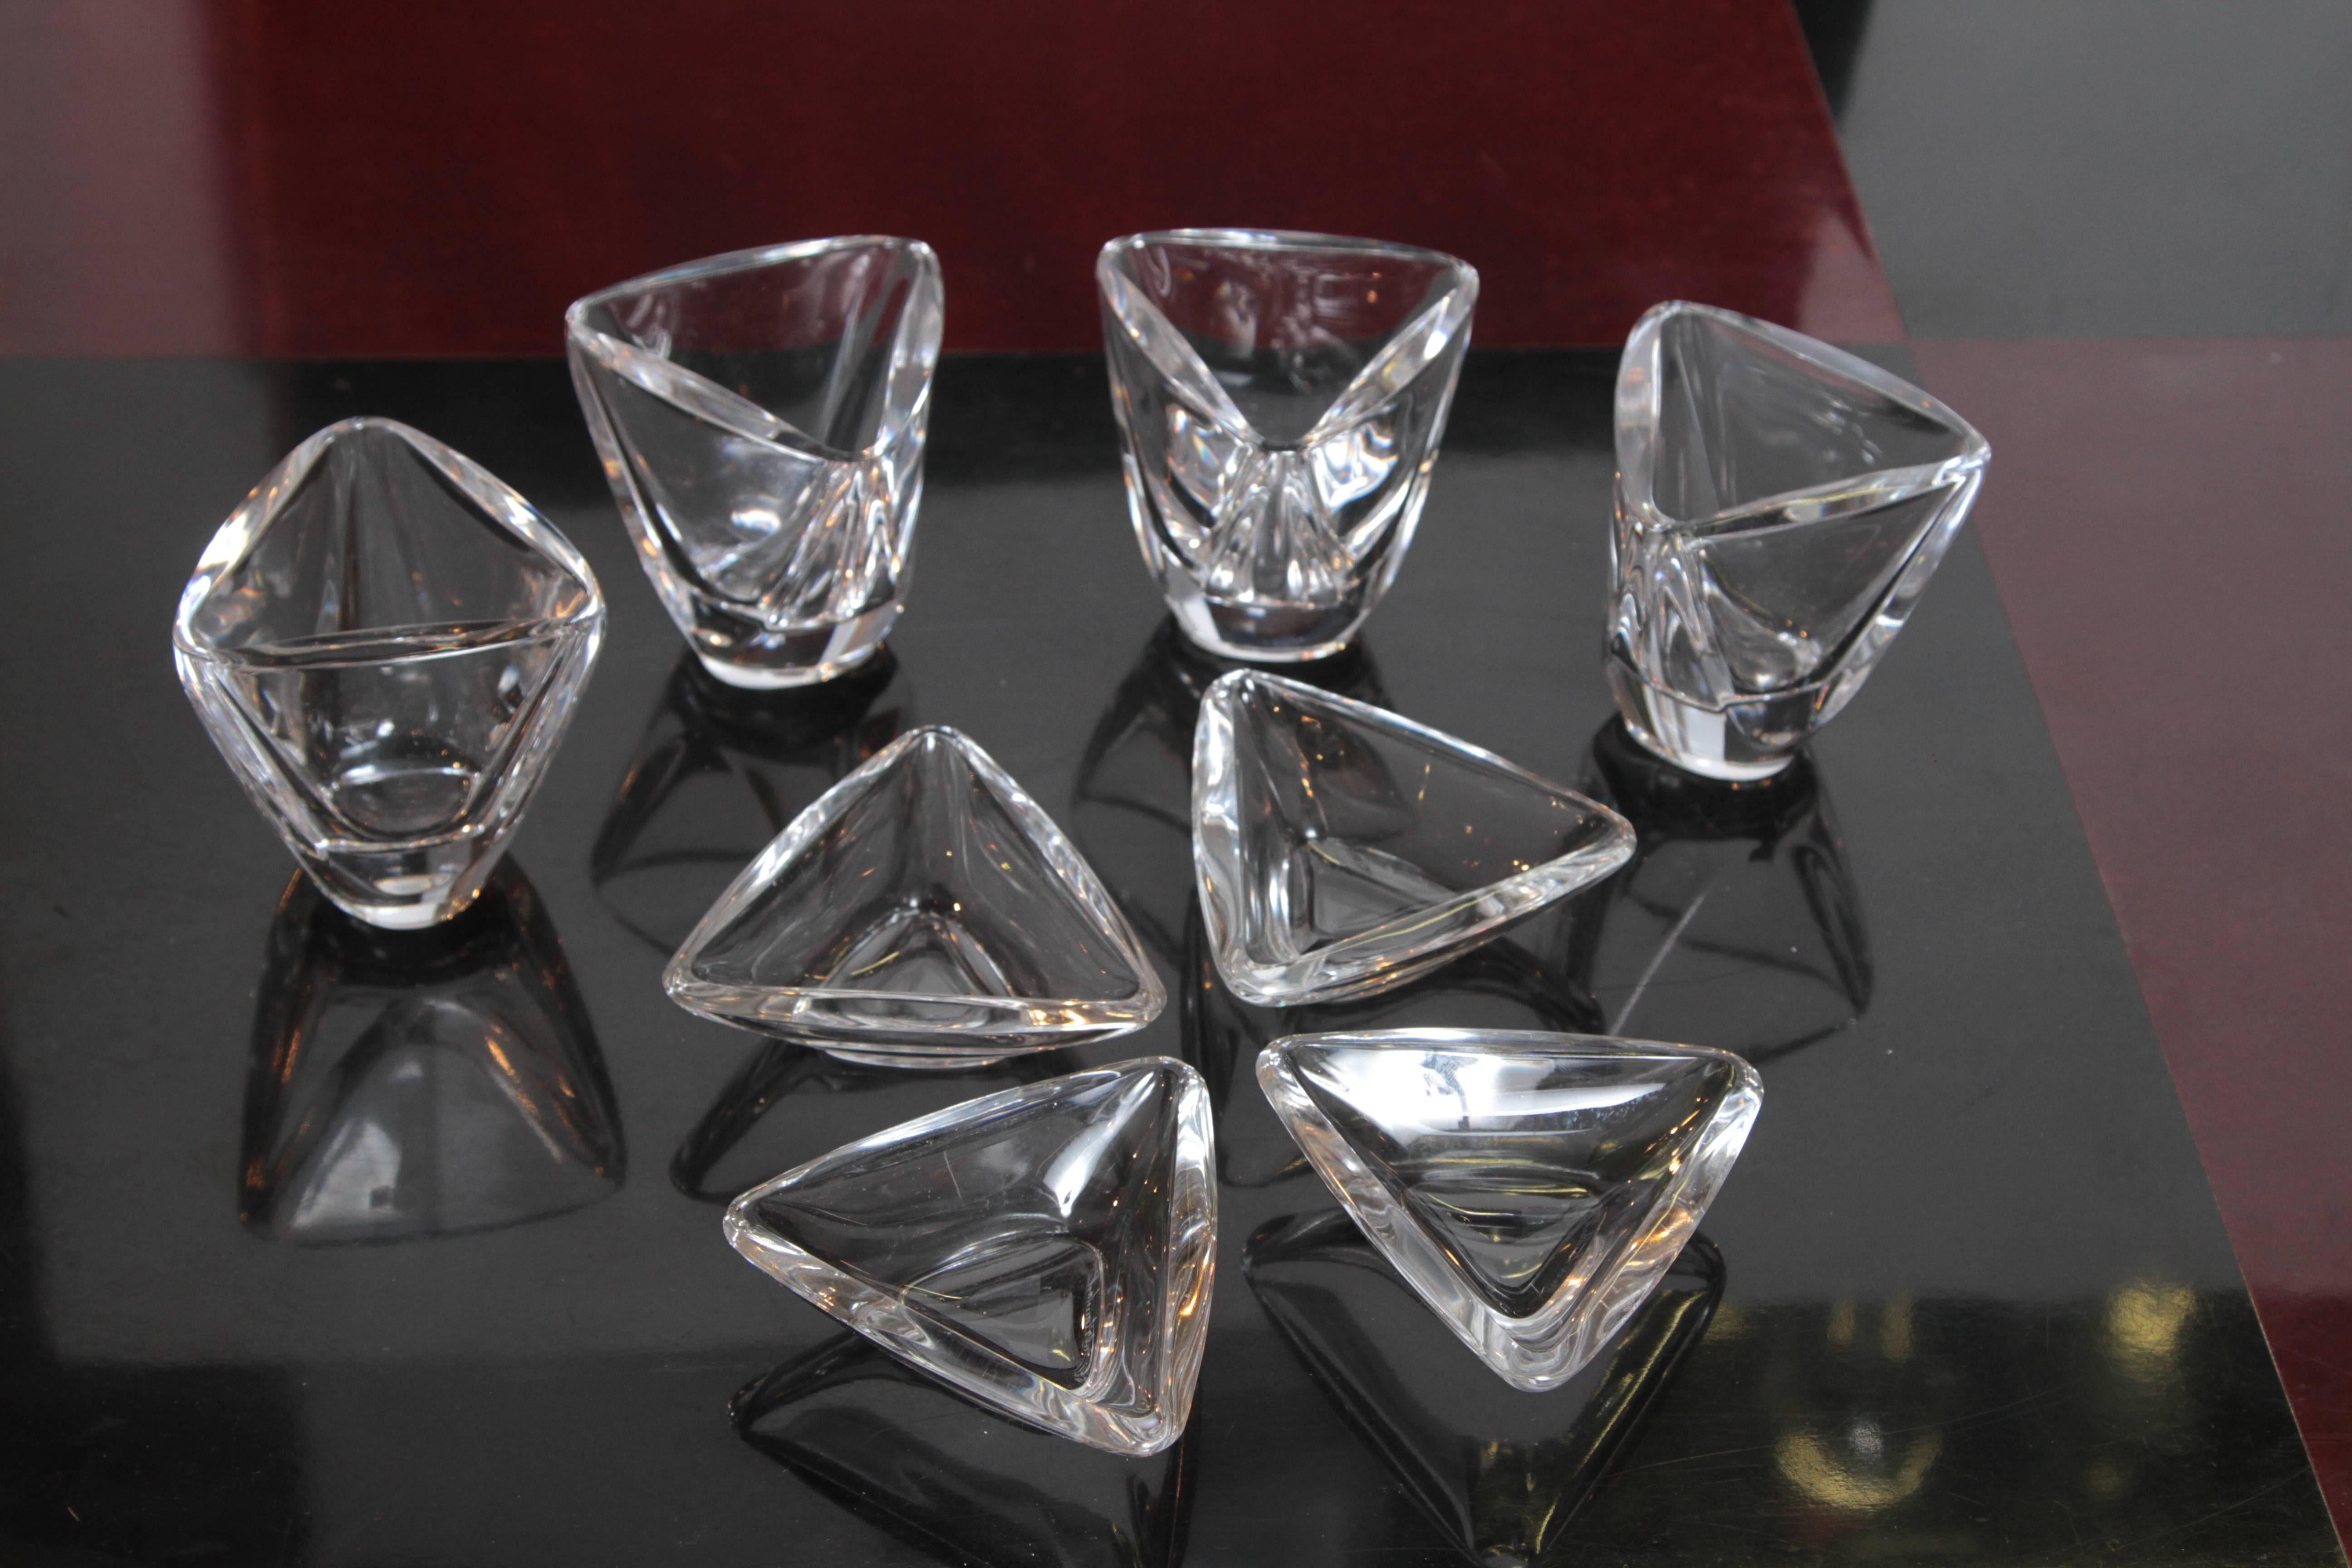 Modernist Peter Muller-Munk crystal for Val Saint Lambert, Belgium, Tricorne pattern, collection 12 pieces

Fabulous collection midcentury design by Müller - Munk Associates, circa 1956-1959. Post his Art Deco / machine age Industrial